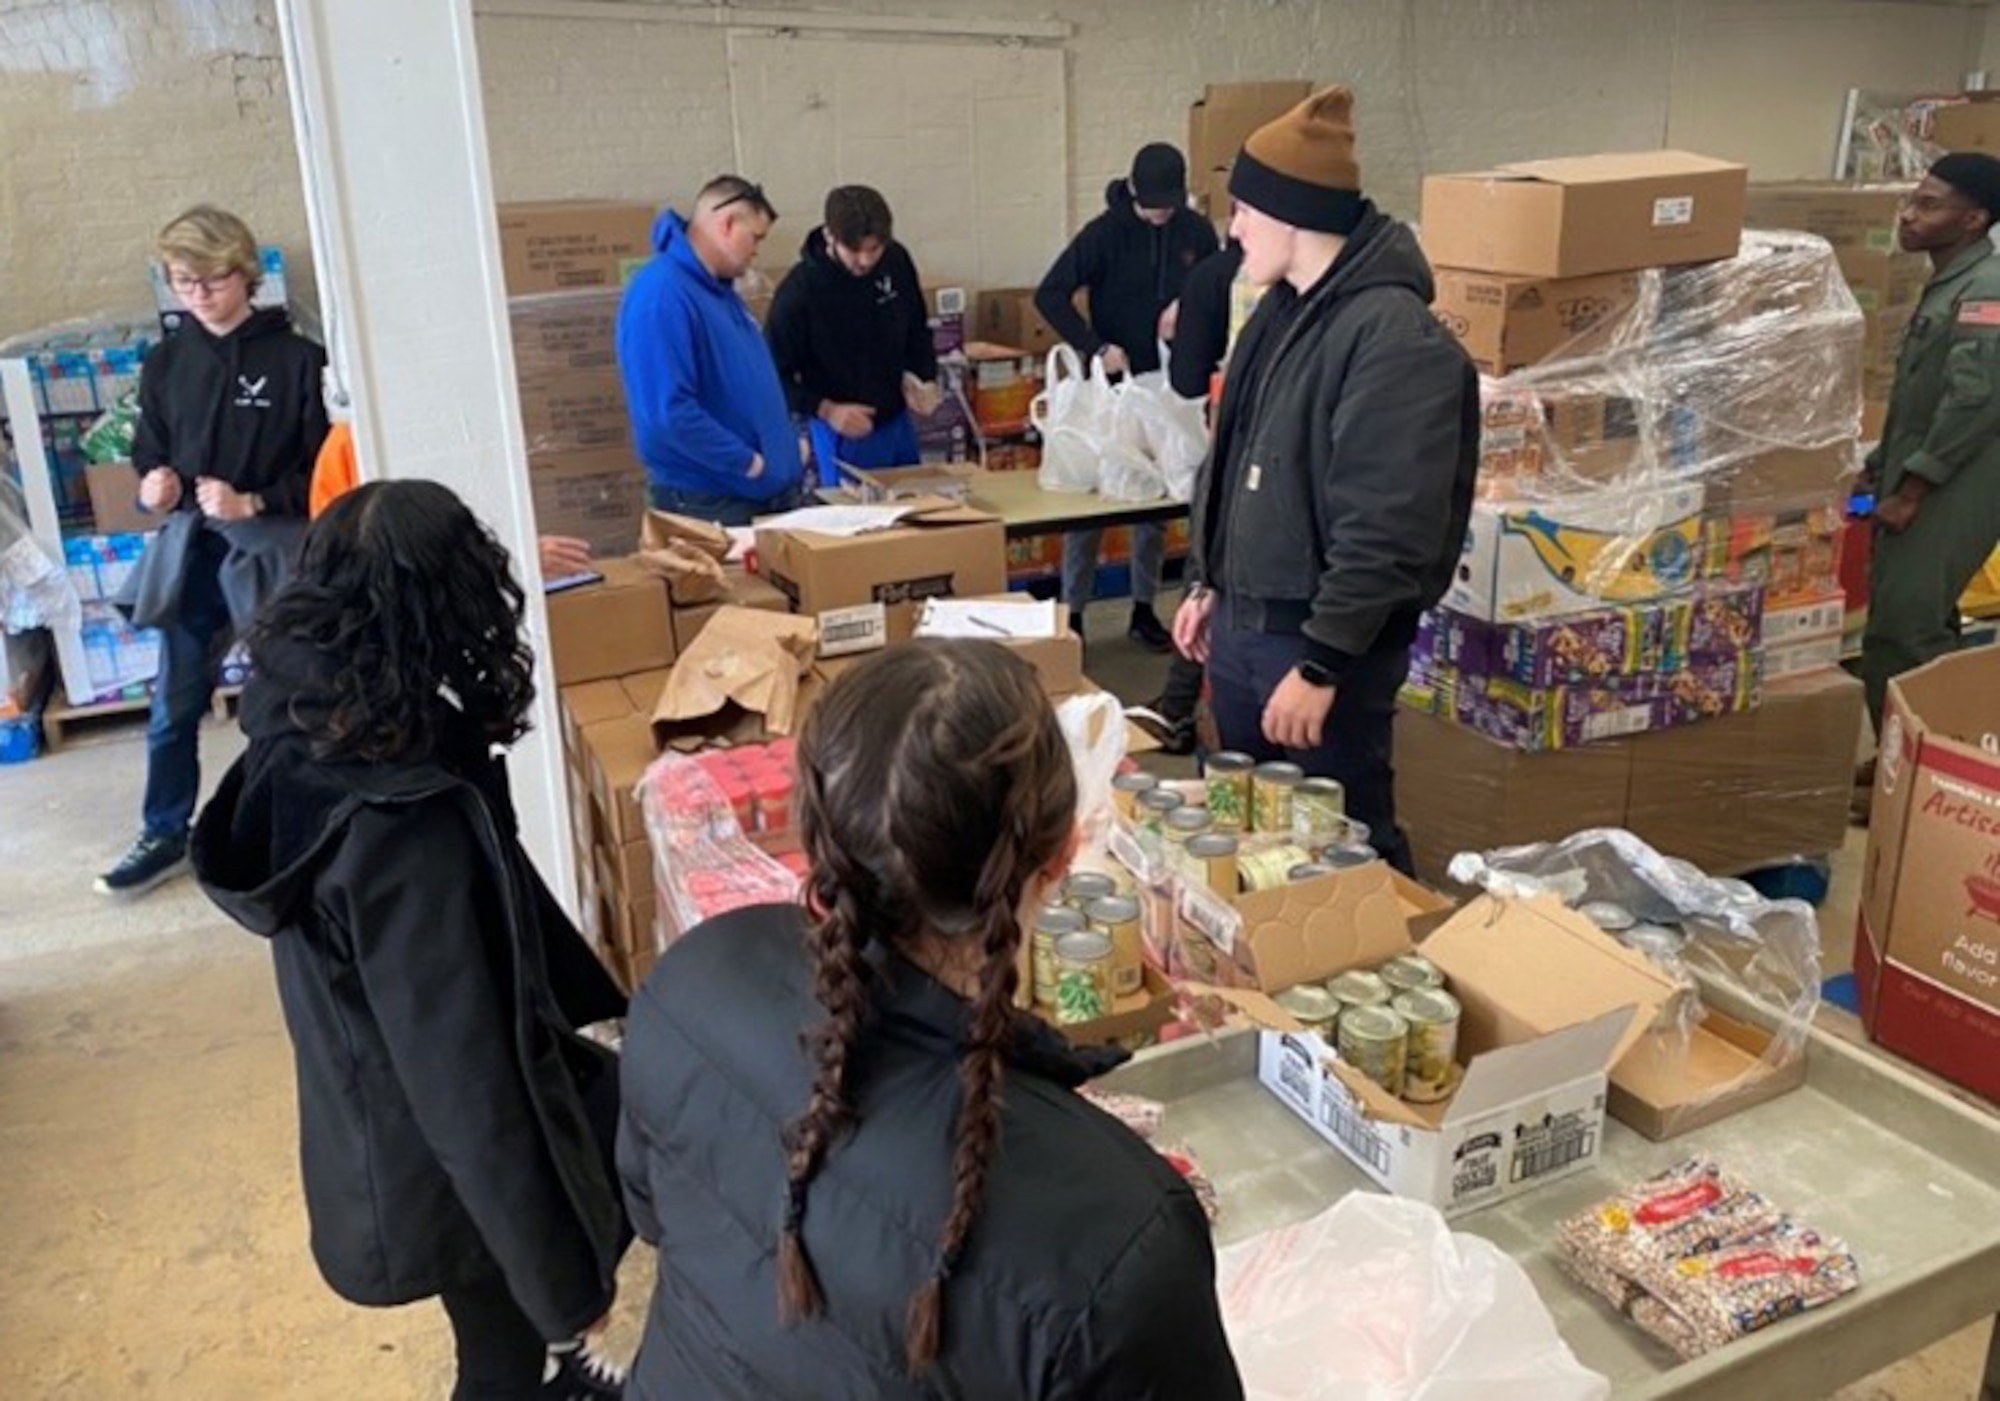 The 338th RCS G-Flight held an outstanding community event at the Love Chapel Food Bank, Columbus, IN. G Flight and their DEP aided the community and bagged over 400 bags of food for underprivileged children throughout Bartholomew County.